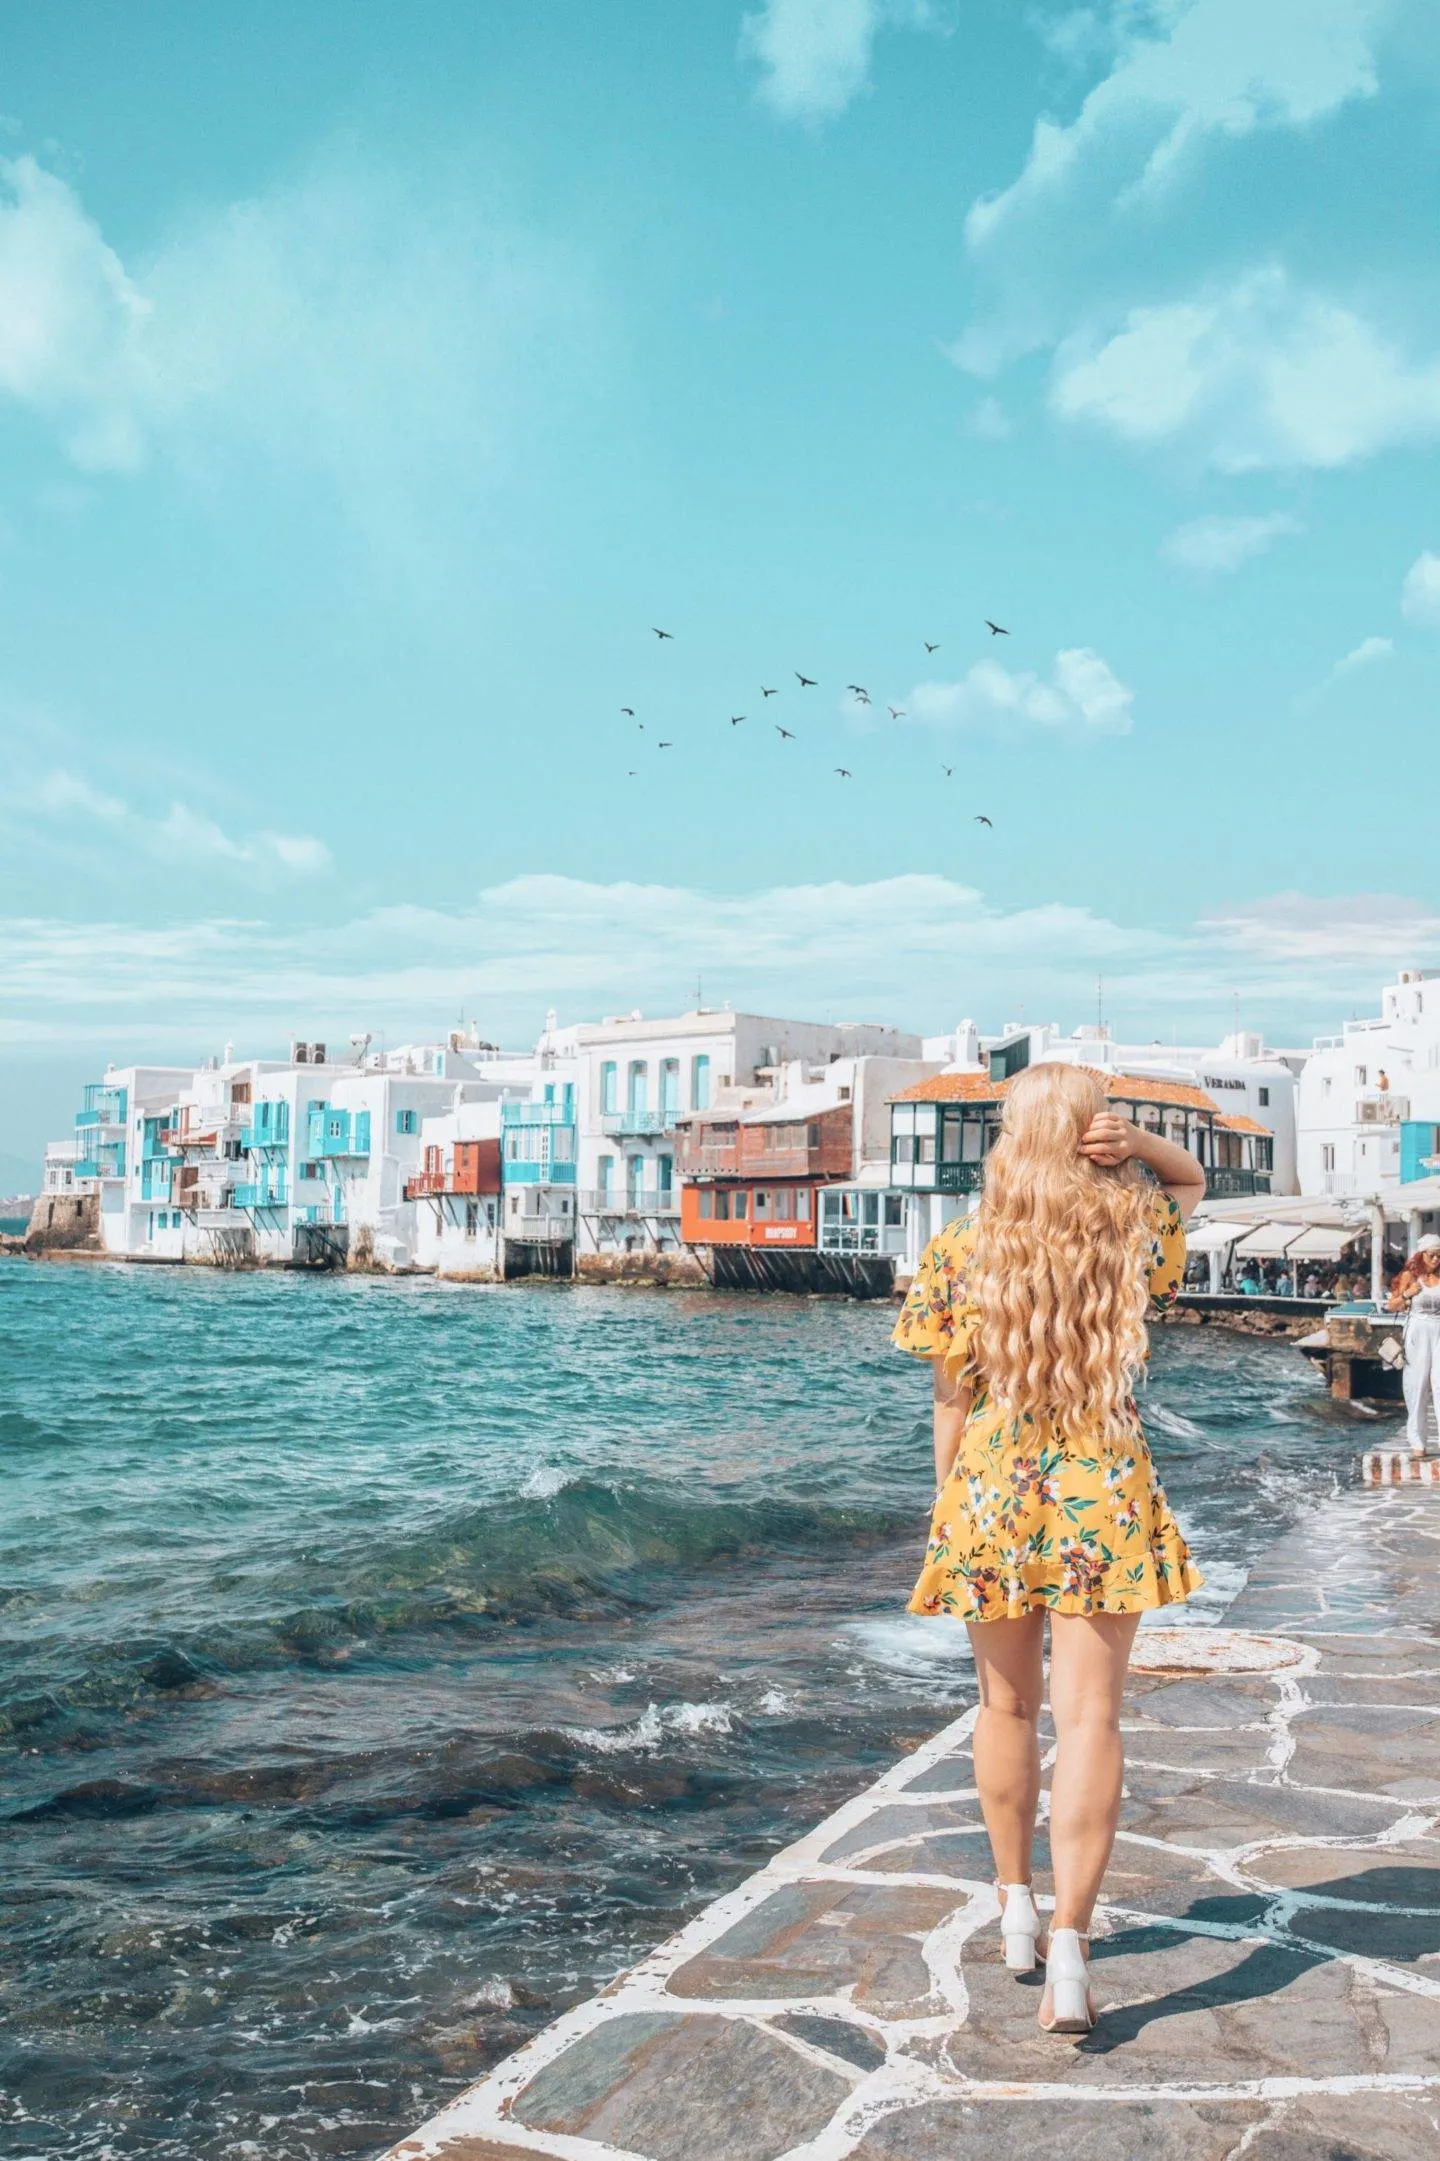 Little Venice is one of the most instagrammable places in Mykonos. Click the photo to see the rest of my list of the most instagrammable places in Mykonos! 